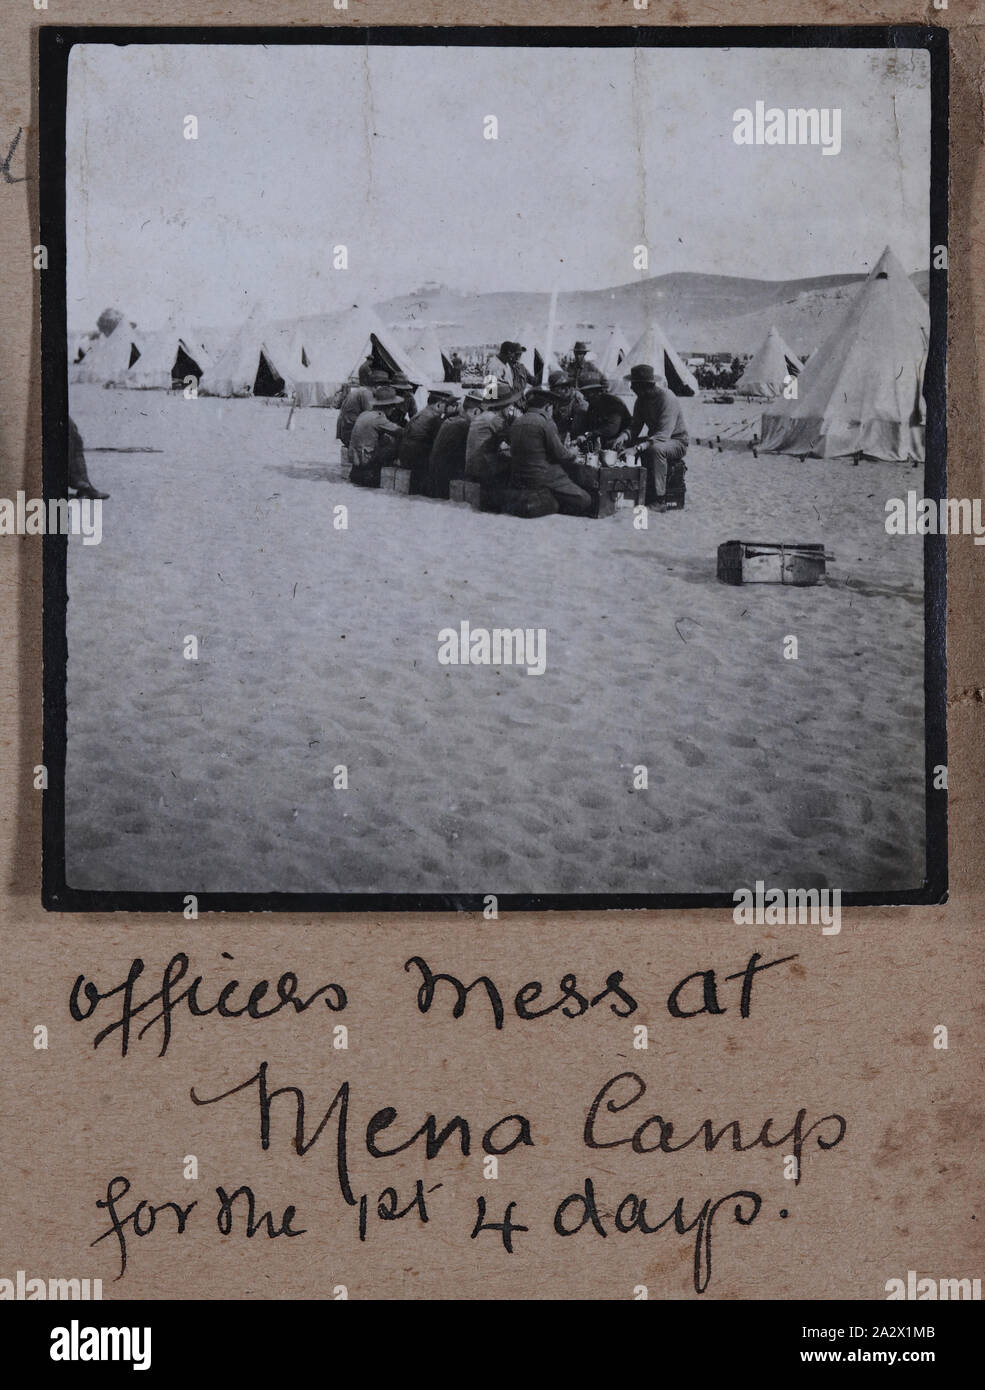 Photograph - 'Officer's Mess', Mena, Captain Edward Albert McKenna, World War I, 1914-1915, One of 139 photographs in an album from World War I likely to have been taken by Captain Edward Albert McKenna. The photographs include the 7th Battalion training in Mena Camp, Egypt, and sight-seeing. Image depicting the Officer's Mess at Mena Camp. Mena Camp was one of three training camps in Egypt that were used by the A.I.F. and the N.Z.E.F Stock Photo